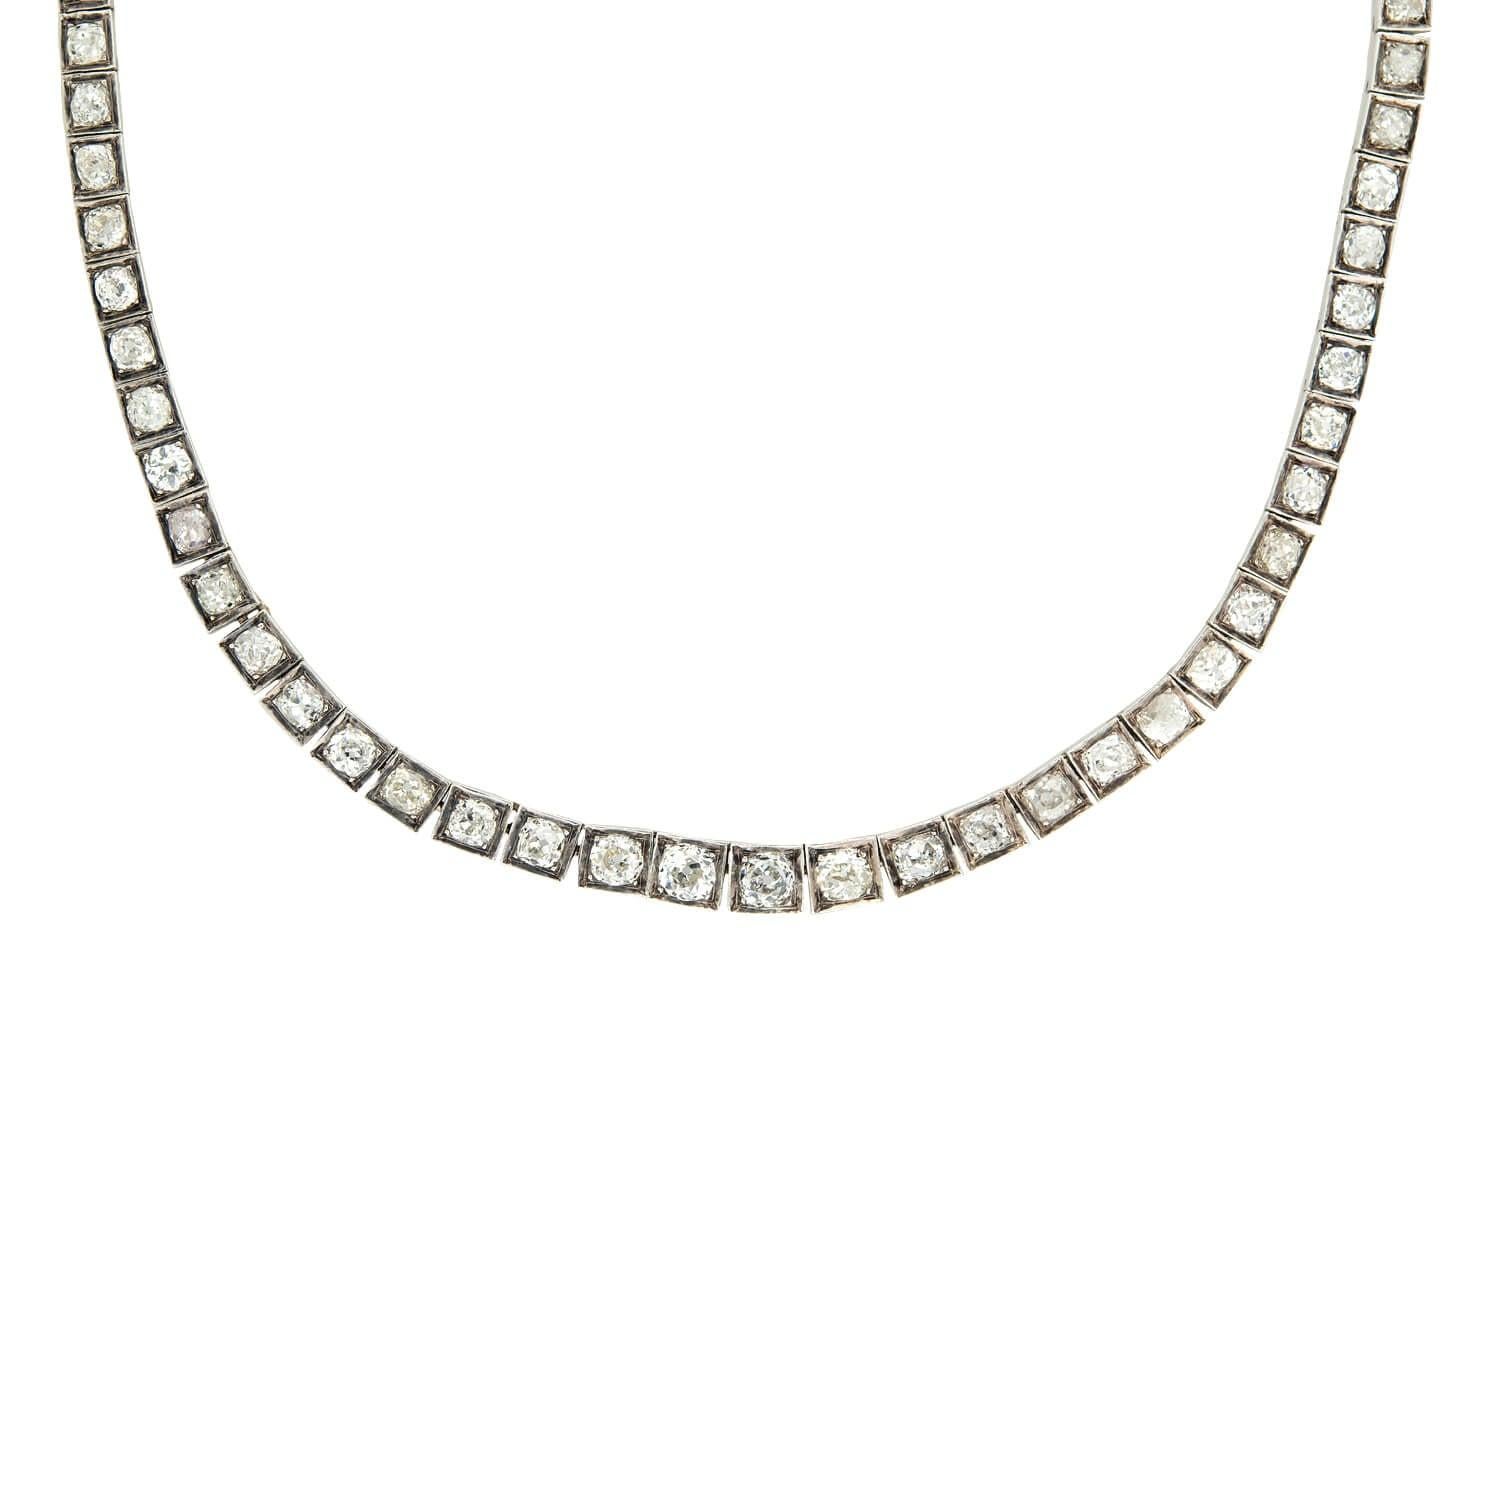 An exquisite Riviera diamond necklace from the Edwardian(ca1910) era! Made of 18k white and yellow gold, this beautiful necklace has 77 graduating old mine cut diamonds which are set within white gold box bead settings. The diamonds are hinged